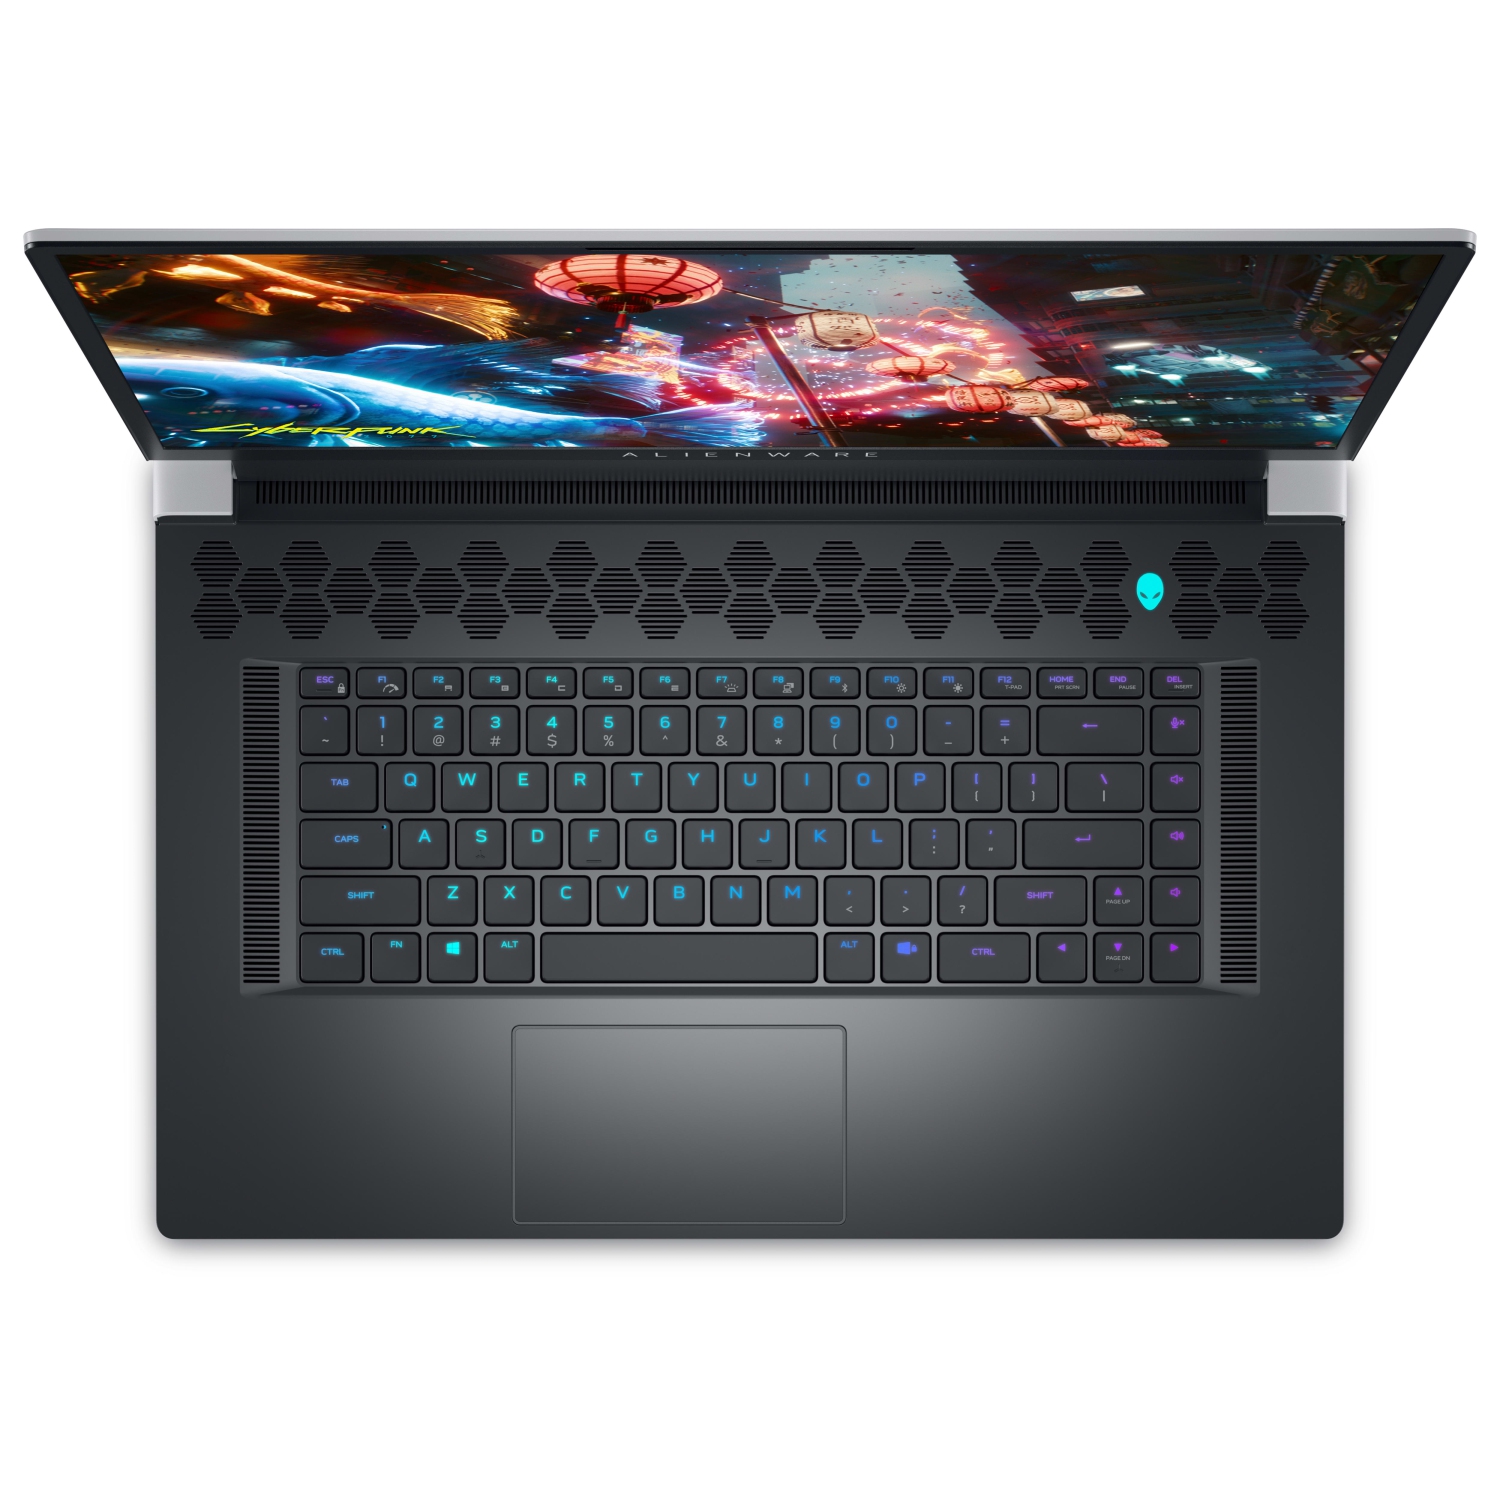 Refurbished (Excellent) – Dell Alienware X17 R2 Gaming Laptop (2022) | 17.3" FHD | Core i9 - 2TB SSD - 64GB RAM - 3070 Ti | 14 Cores @ 5 GHz - 12th Gen CPU - 8GB GDDR6X